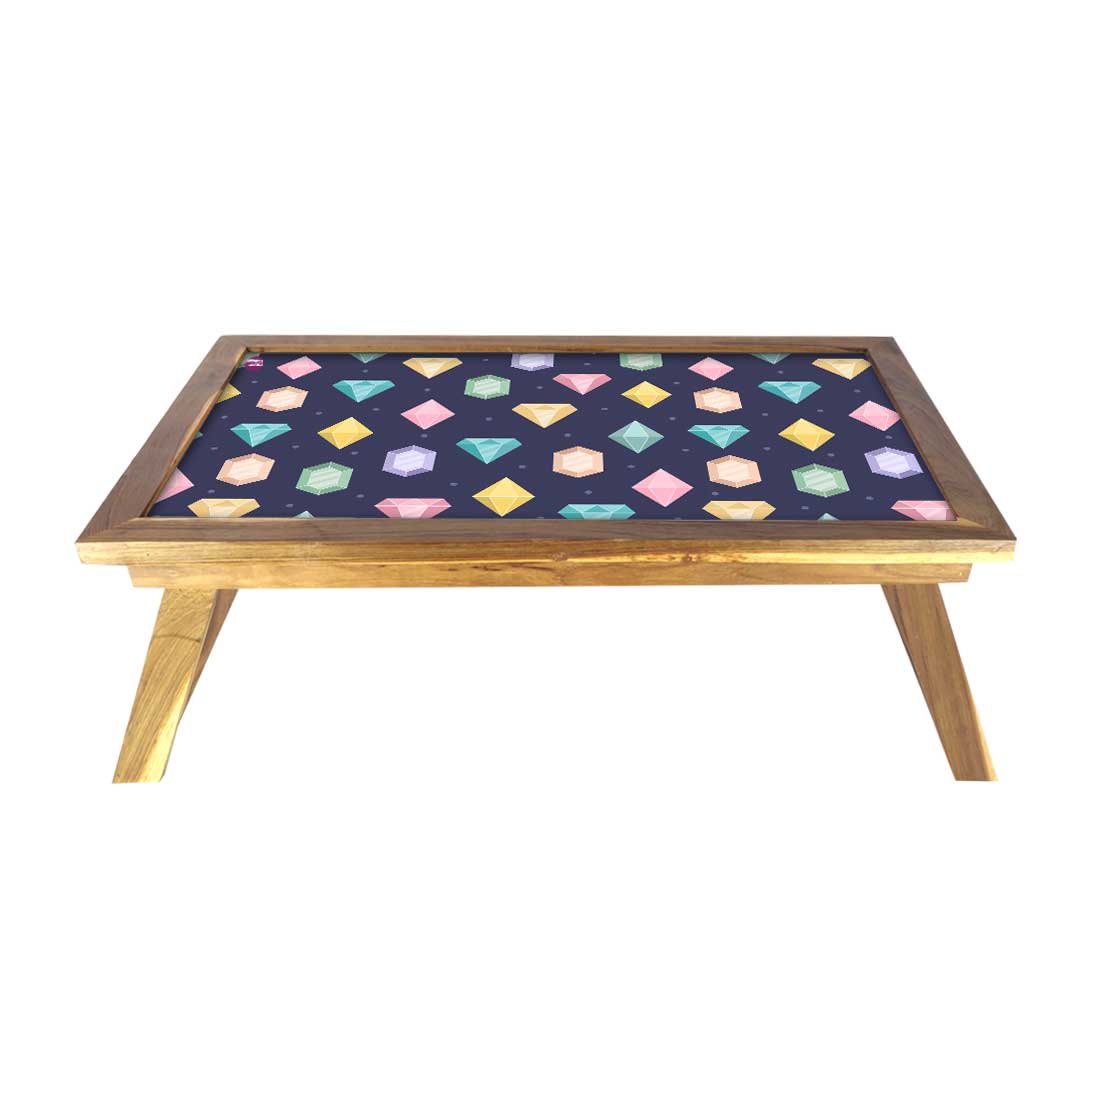 Folding Laptop Table for Home Bed Desk Breakfast Table - Colorful Diamond Nutcase